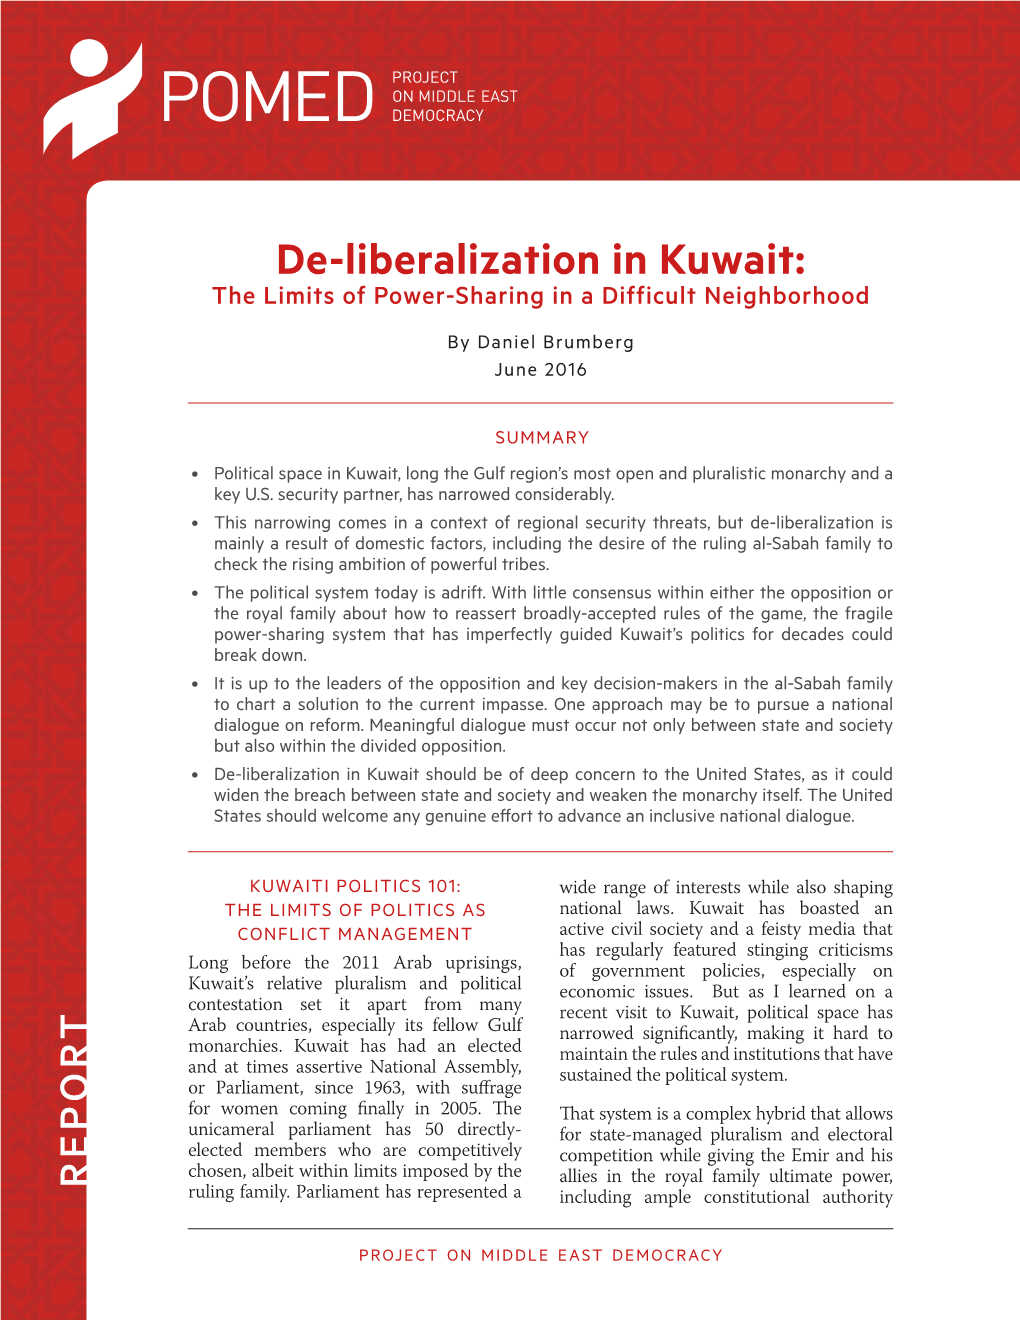 De-Liberalization in Kuwait: the Limits of Power-Sharing in a Difficult Neighborhood